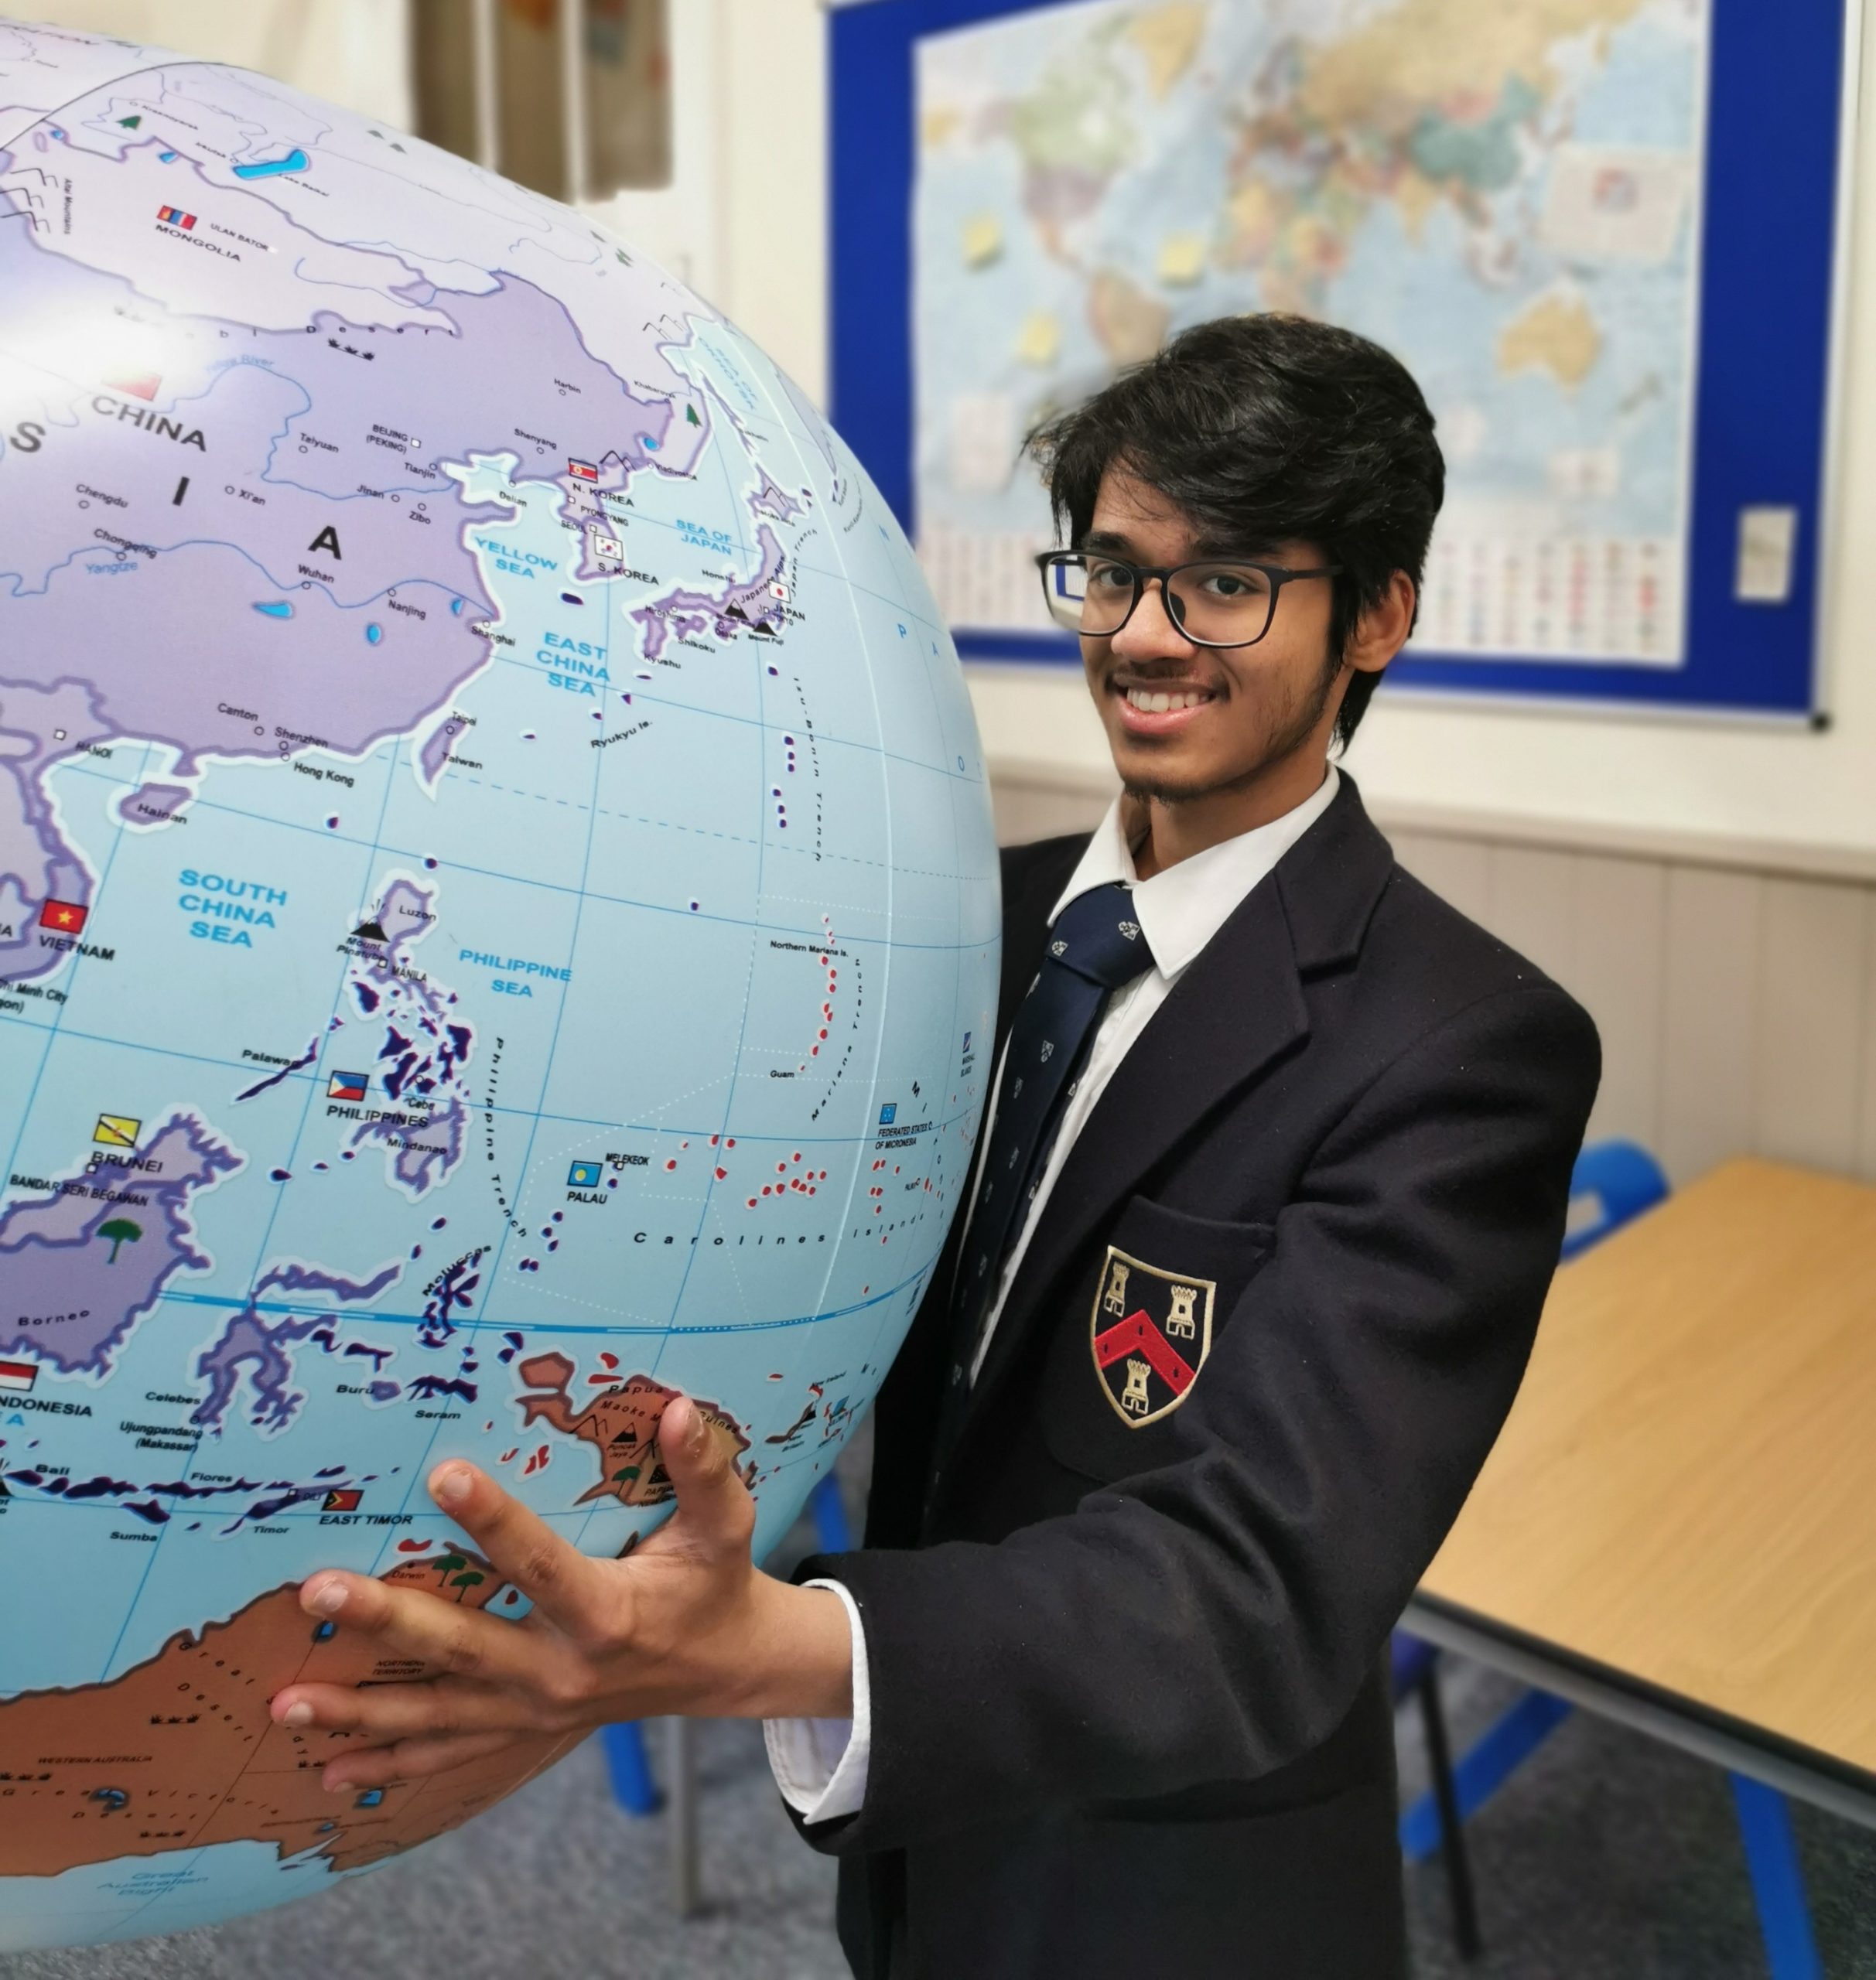 royal geographical society essay competition